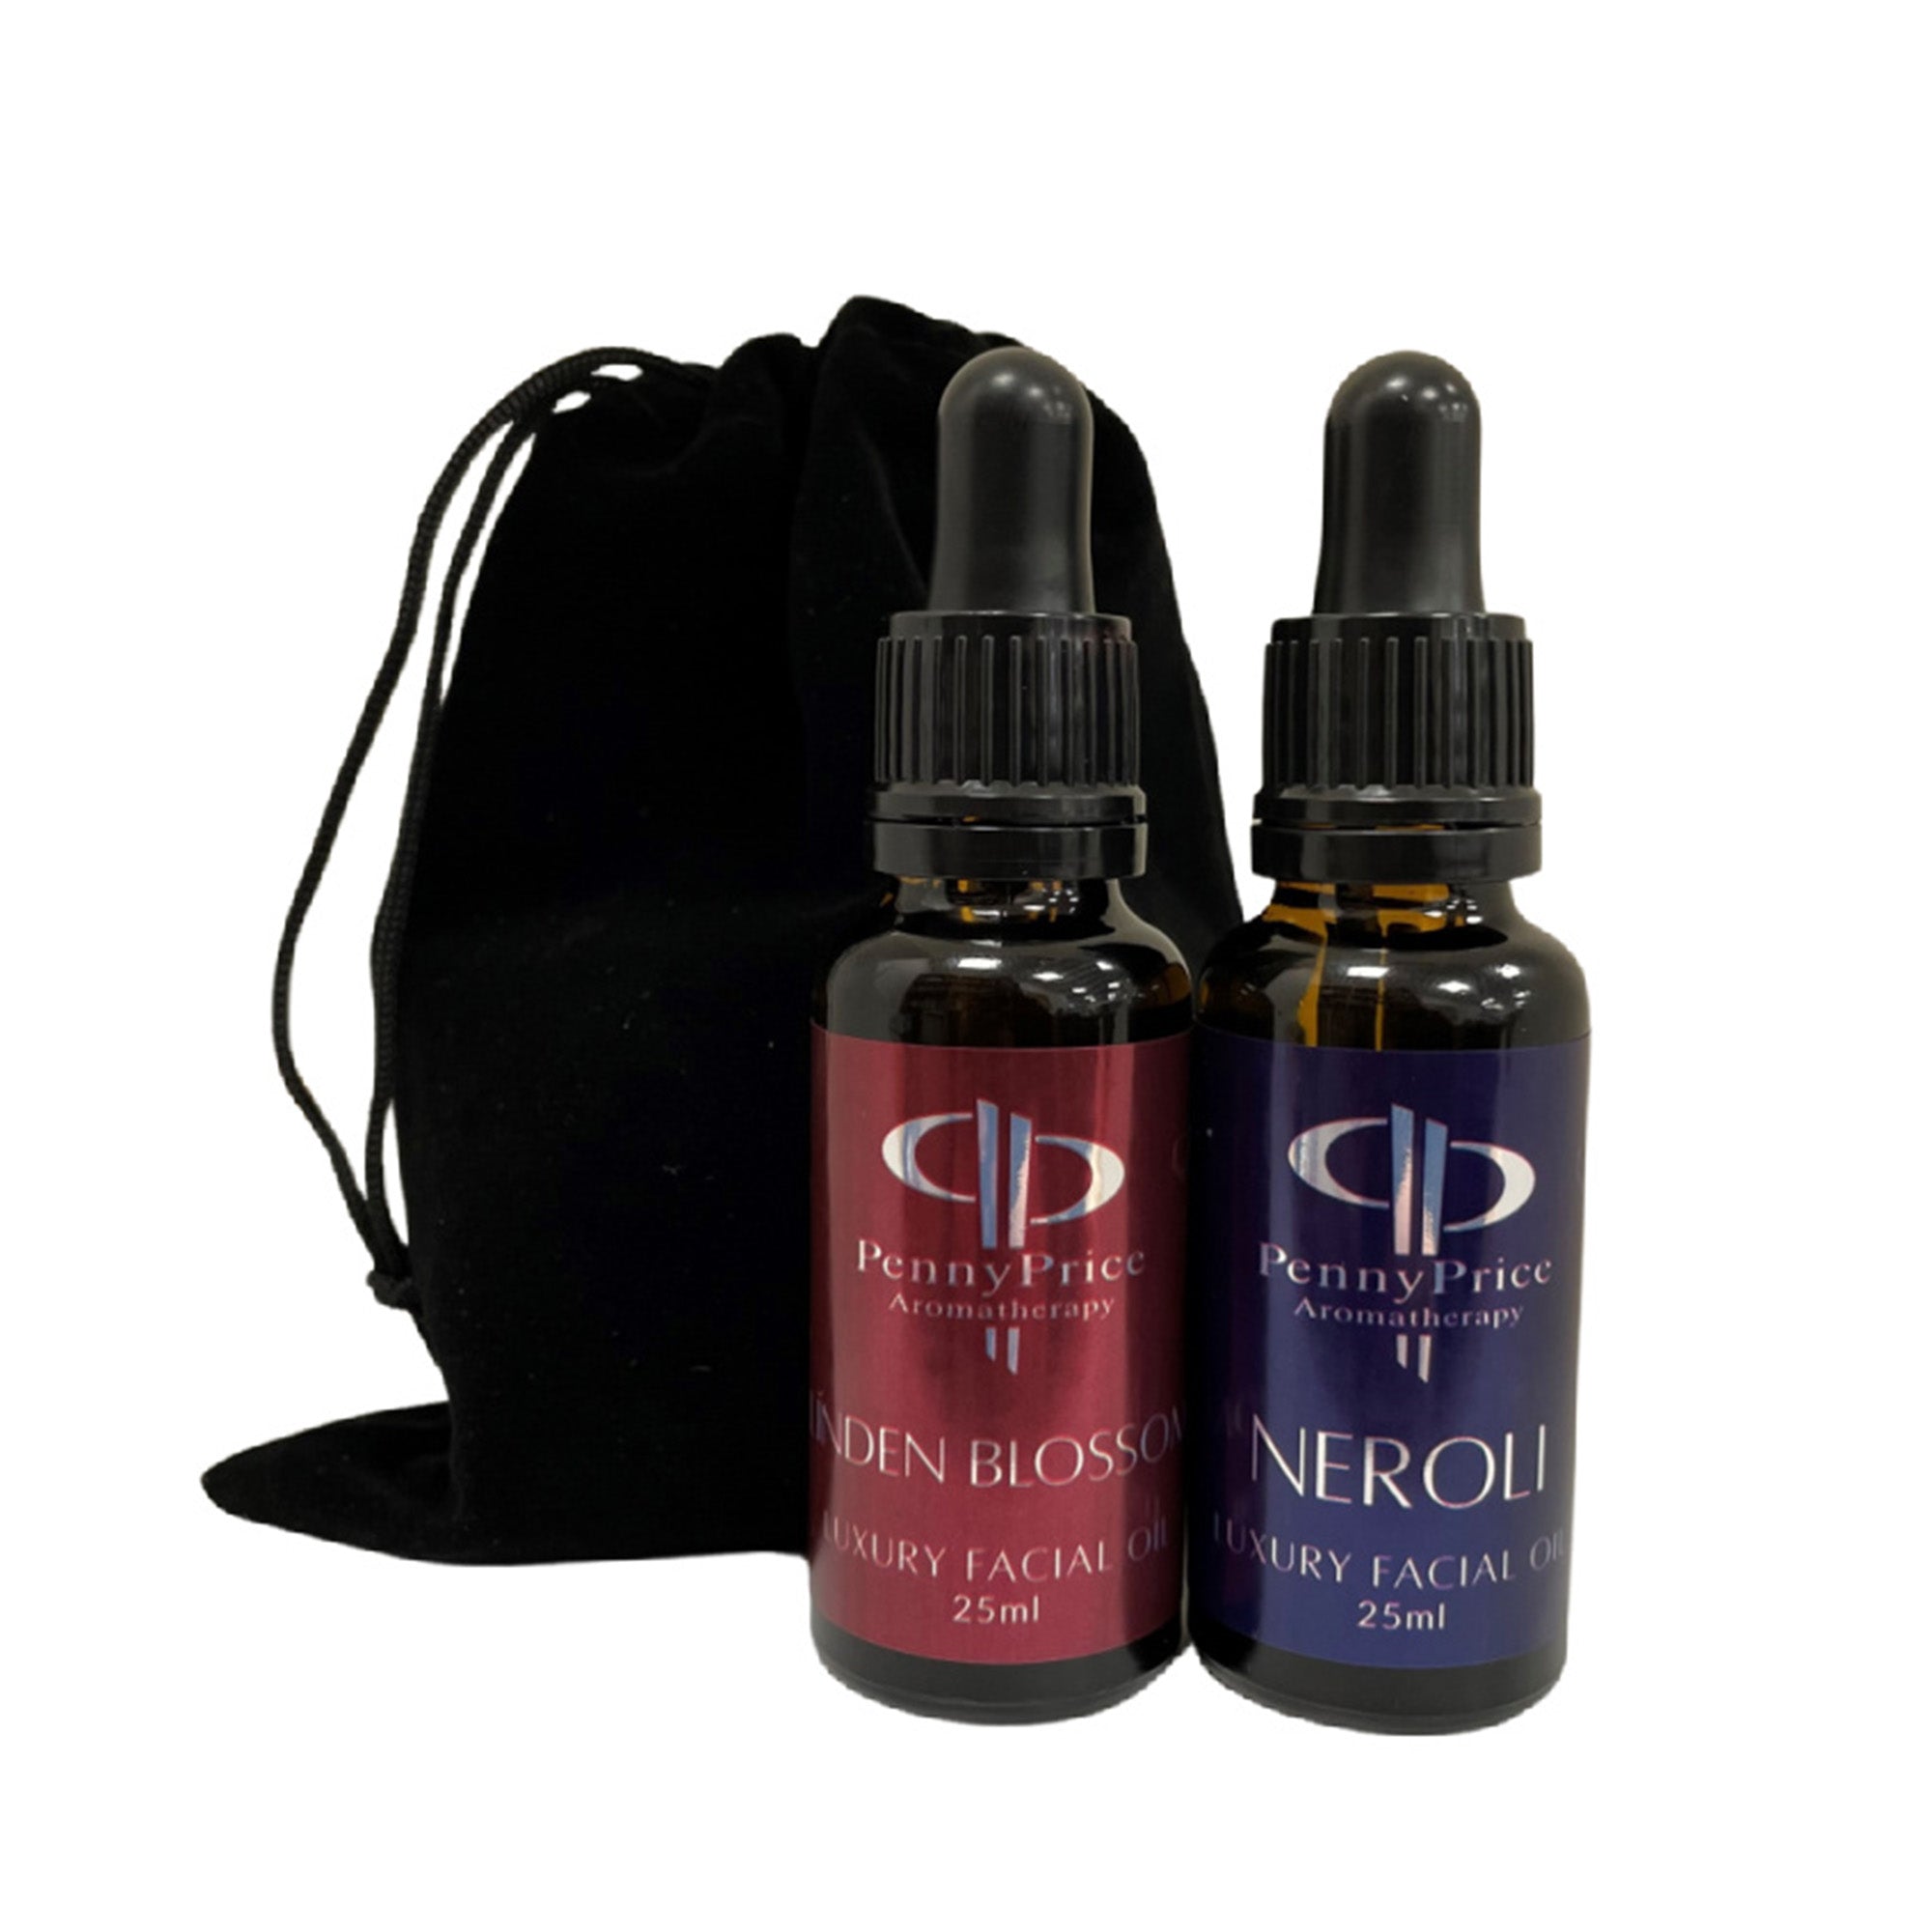 Luxury Facial Oil Duo Gift Set